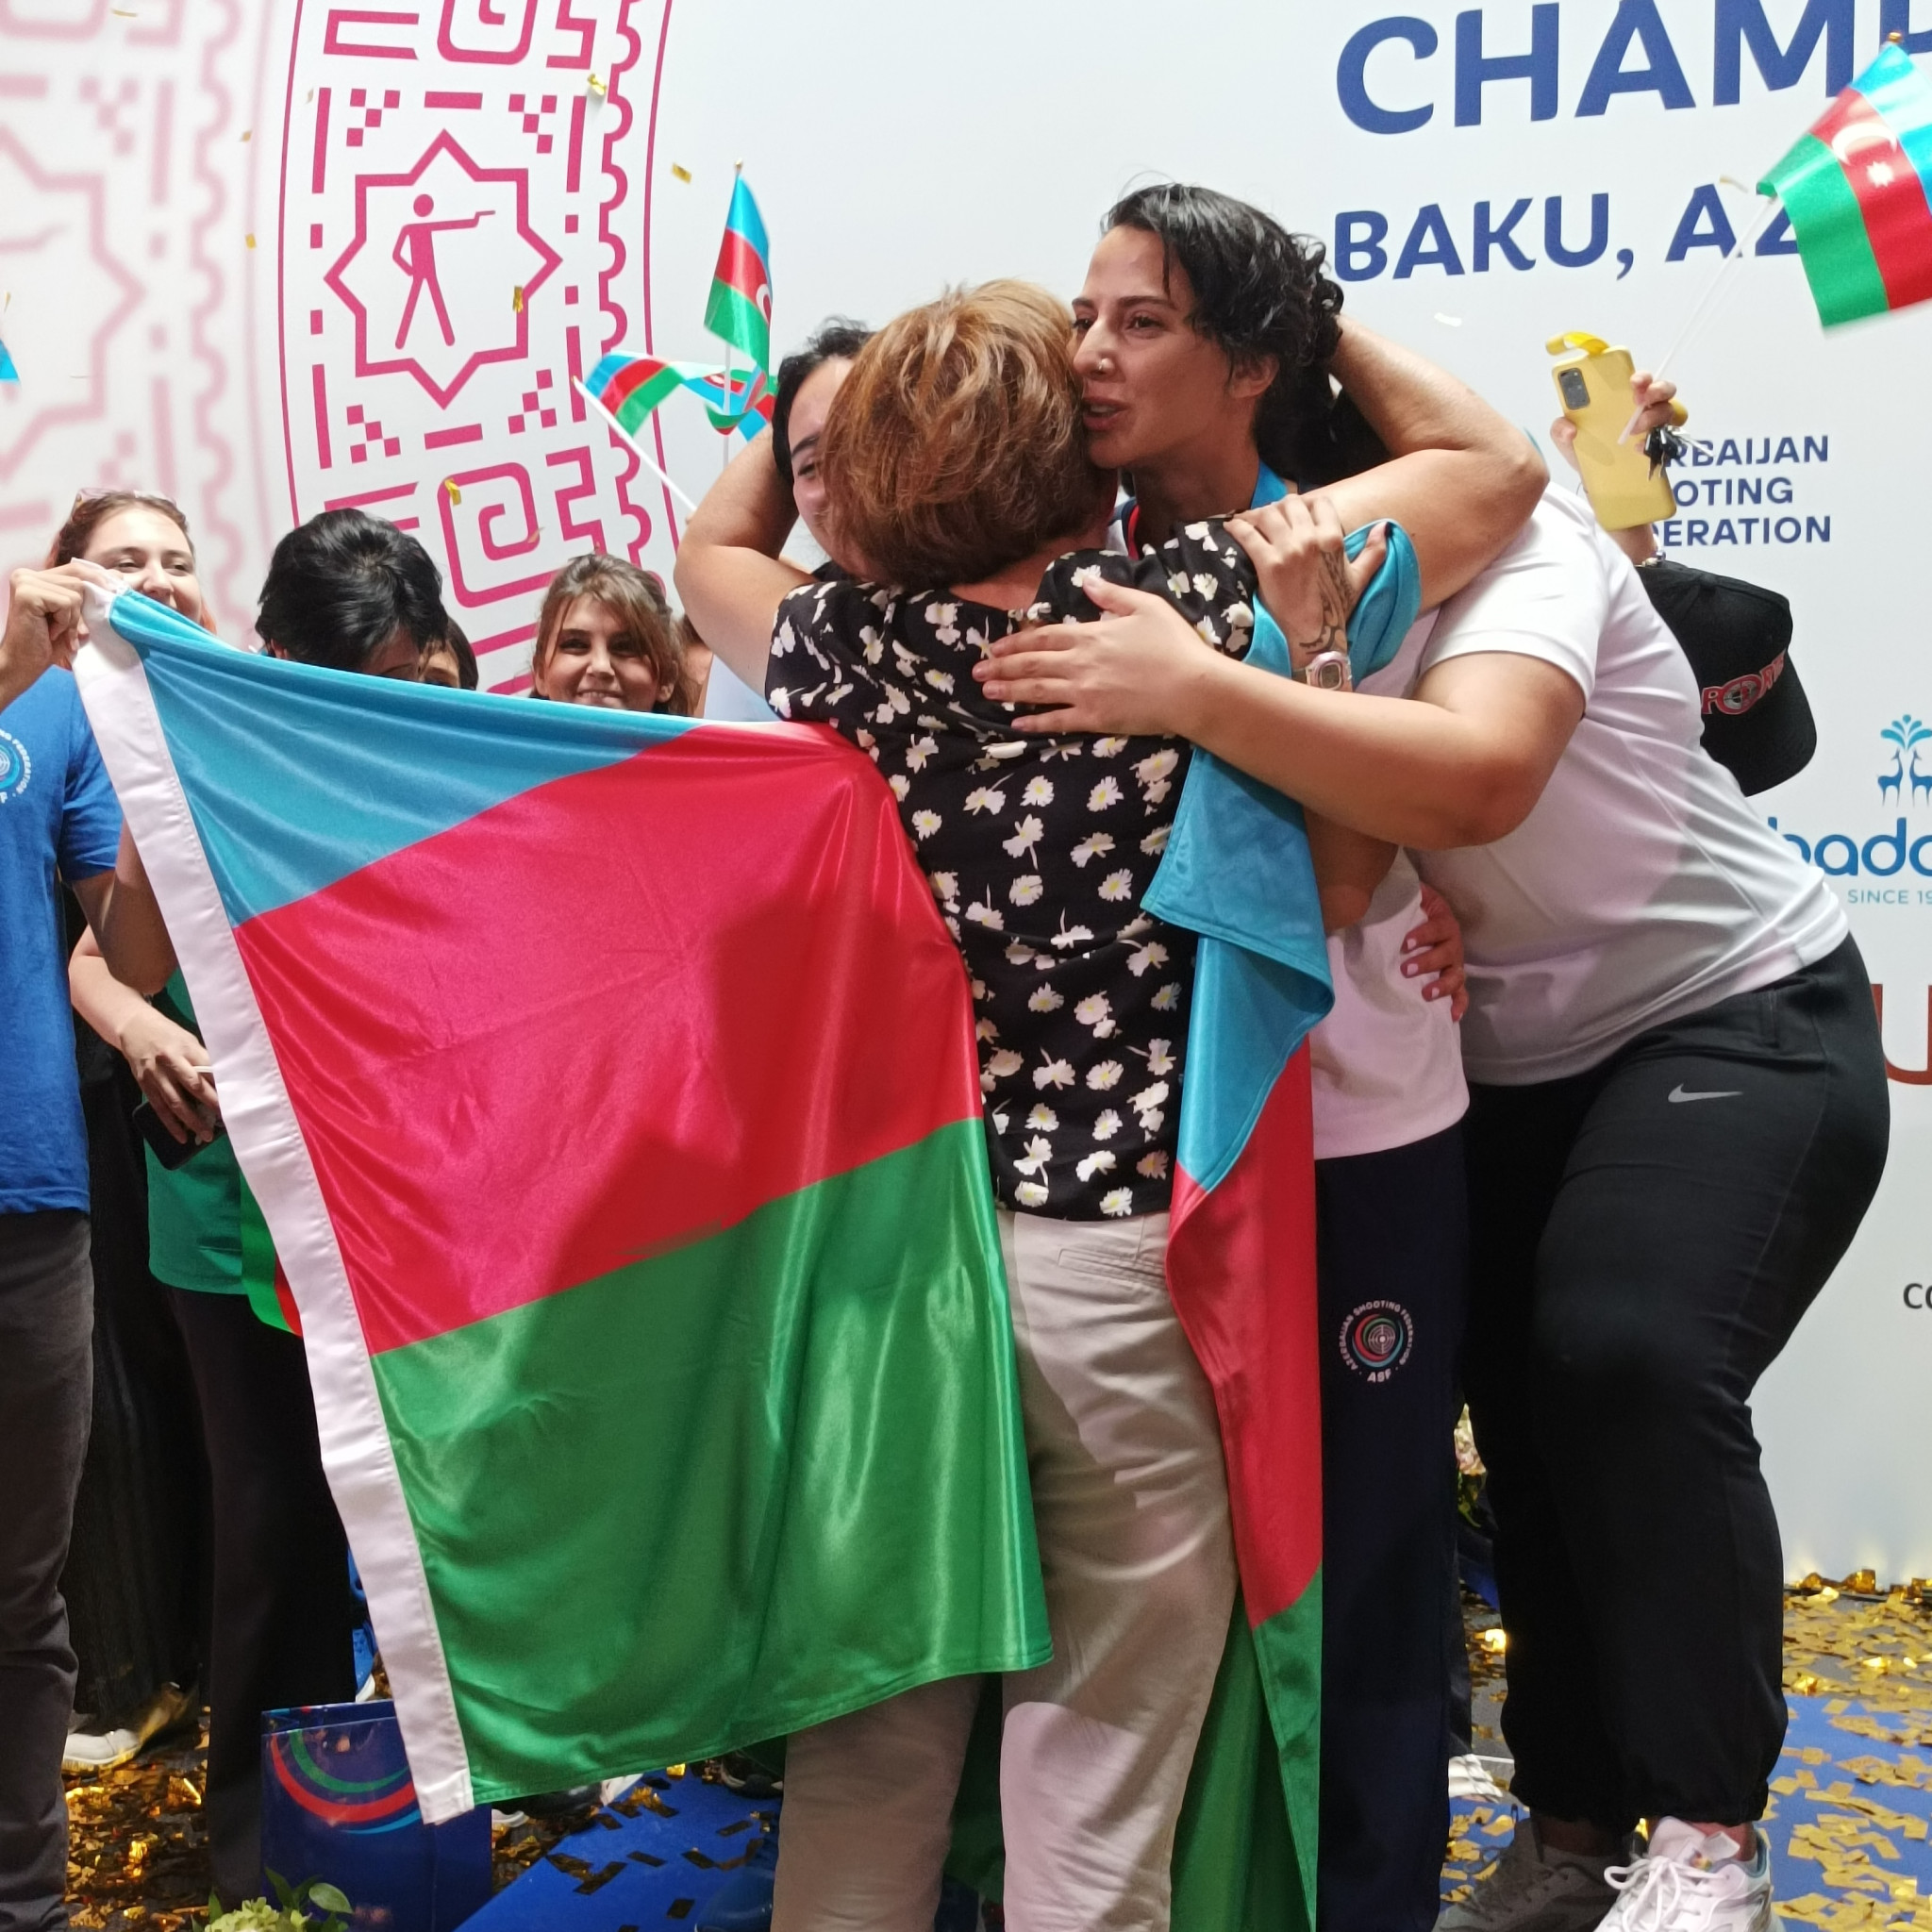 Azerbaijan Sports Minister revels in country's first medal of ISSF World Championships